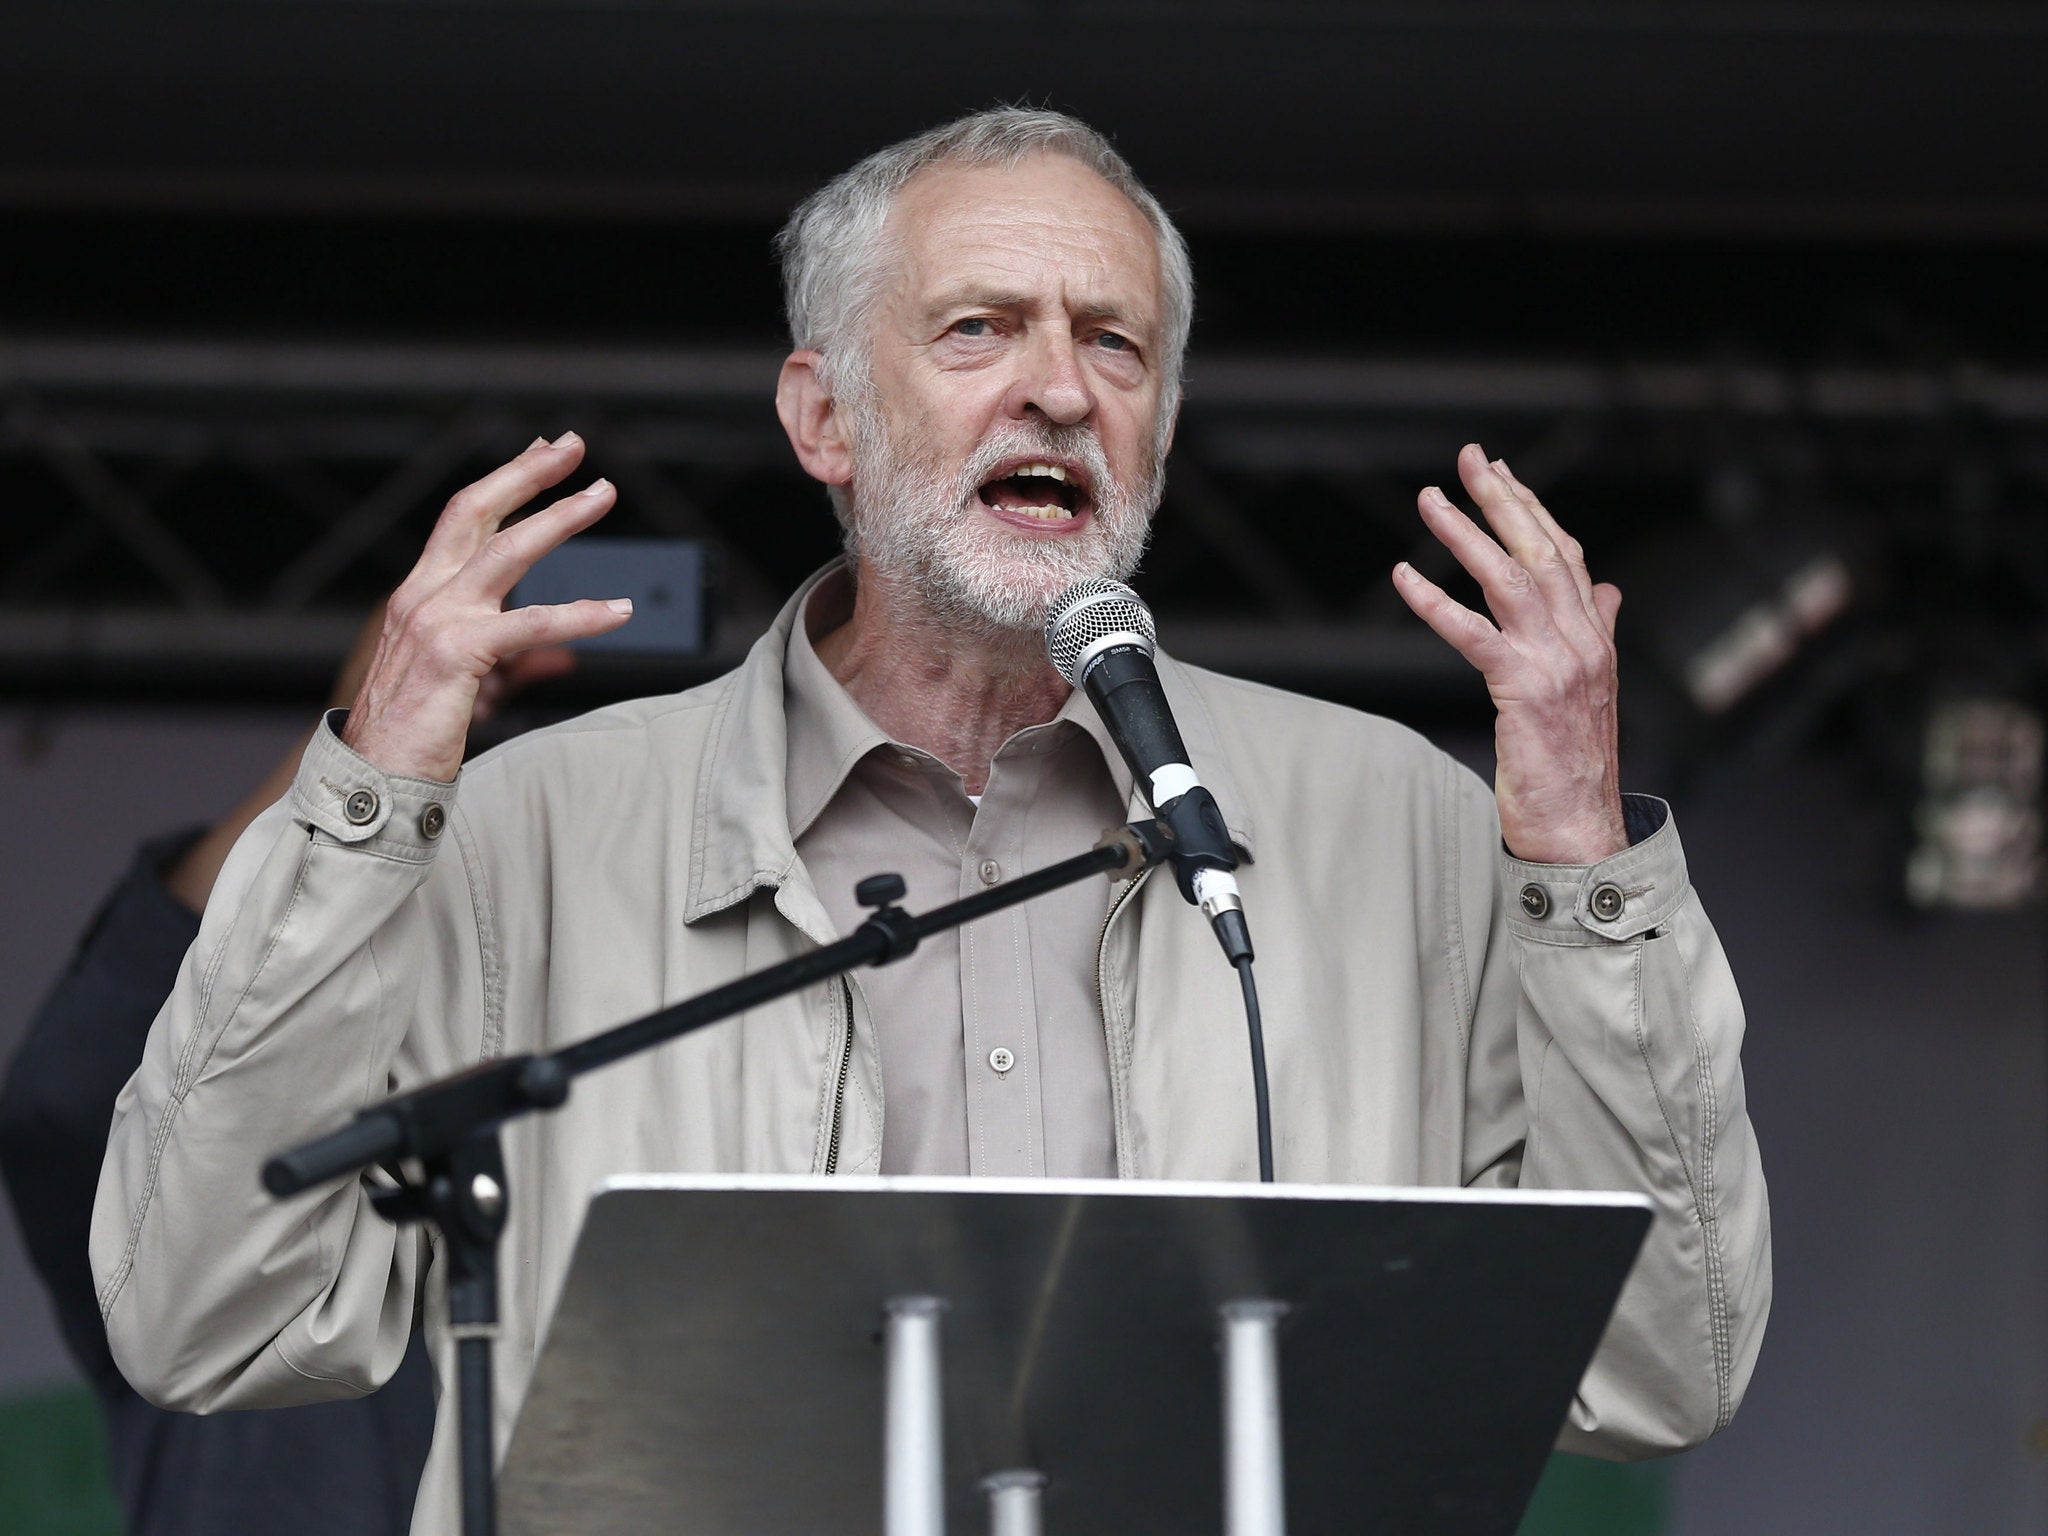 Another poll has put Jeremy Corbyn as the front runner in the Labour leadership contest